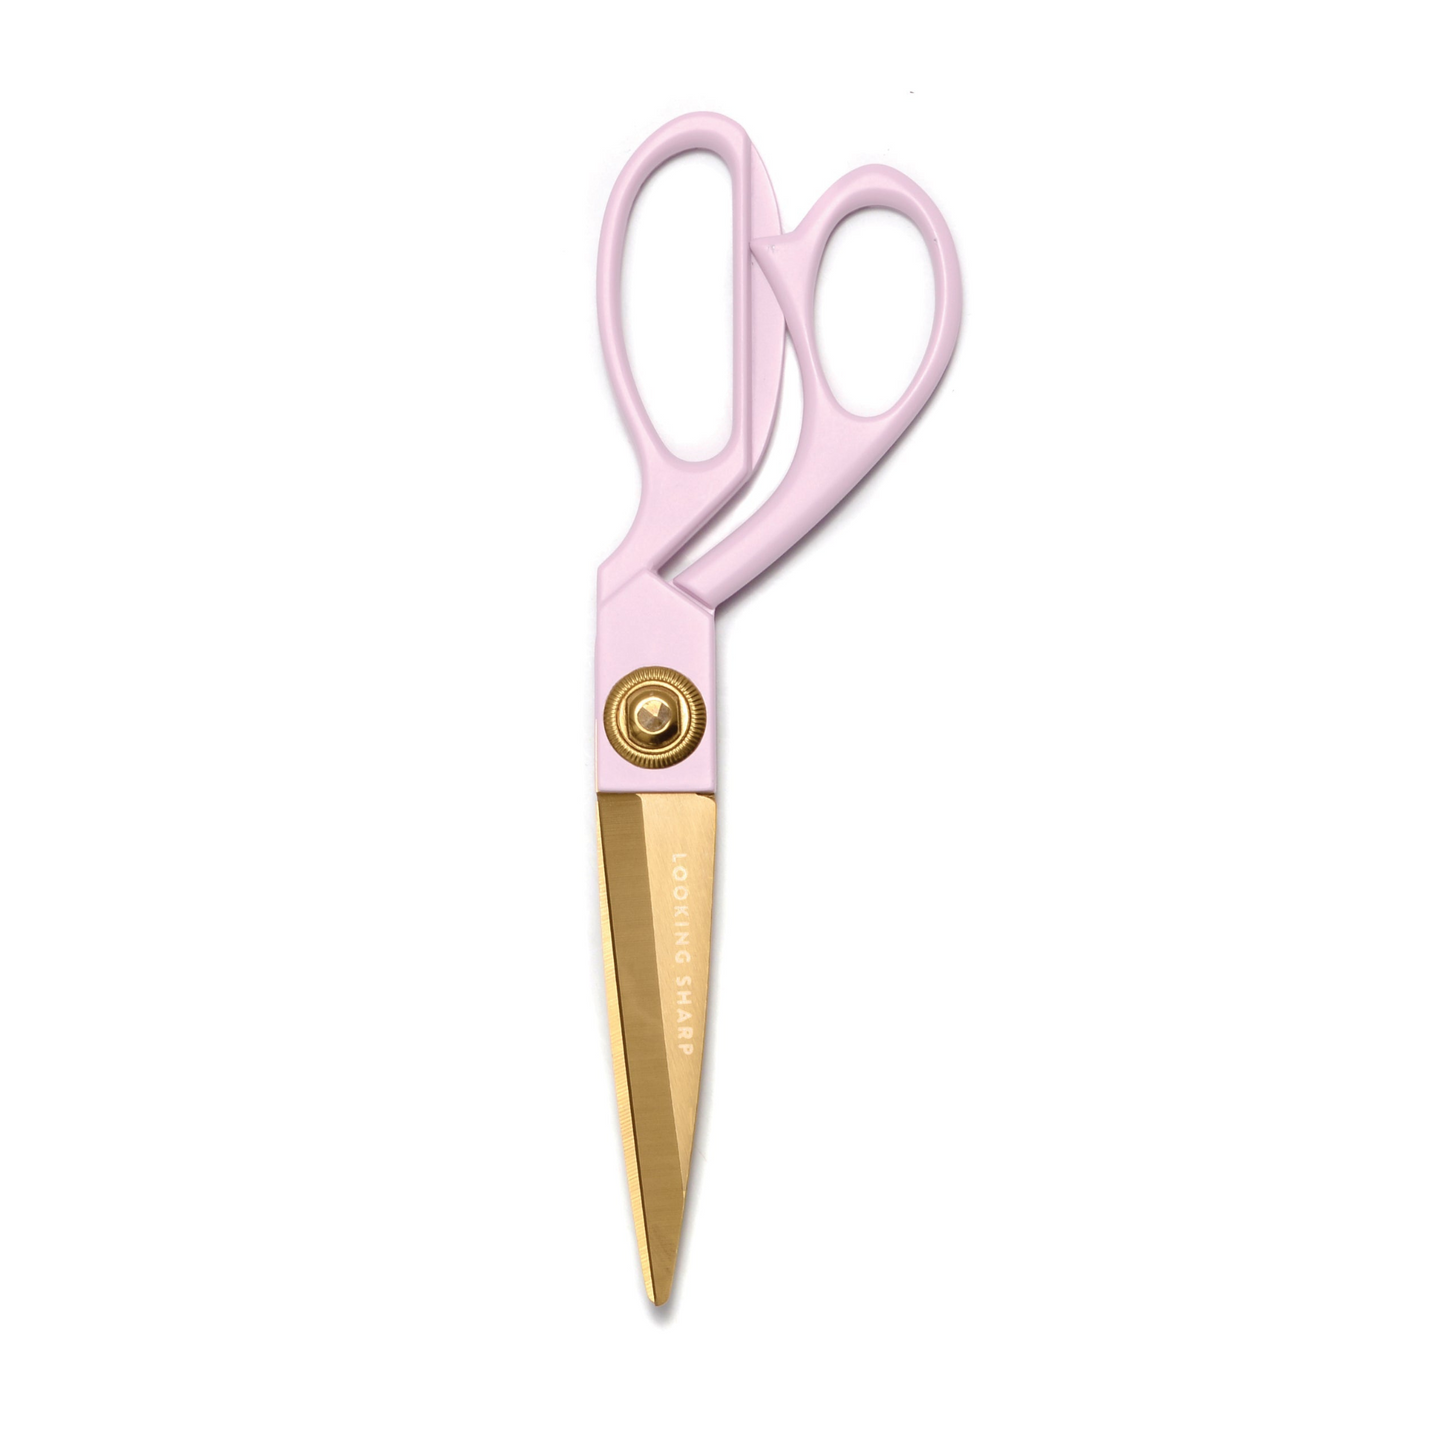 pink and gold scissors on a white background.